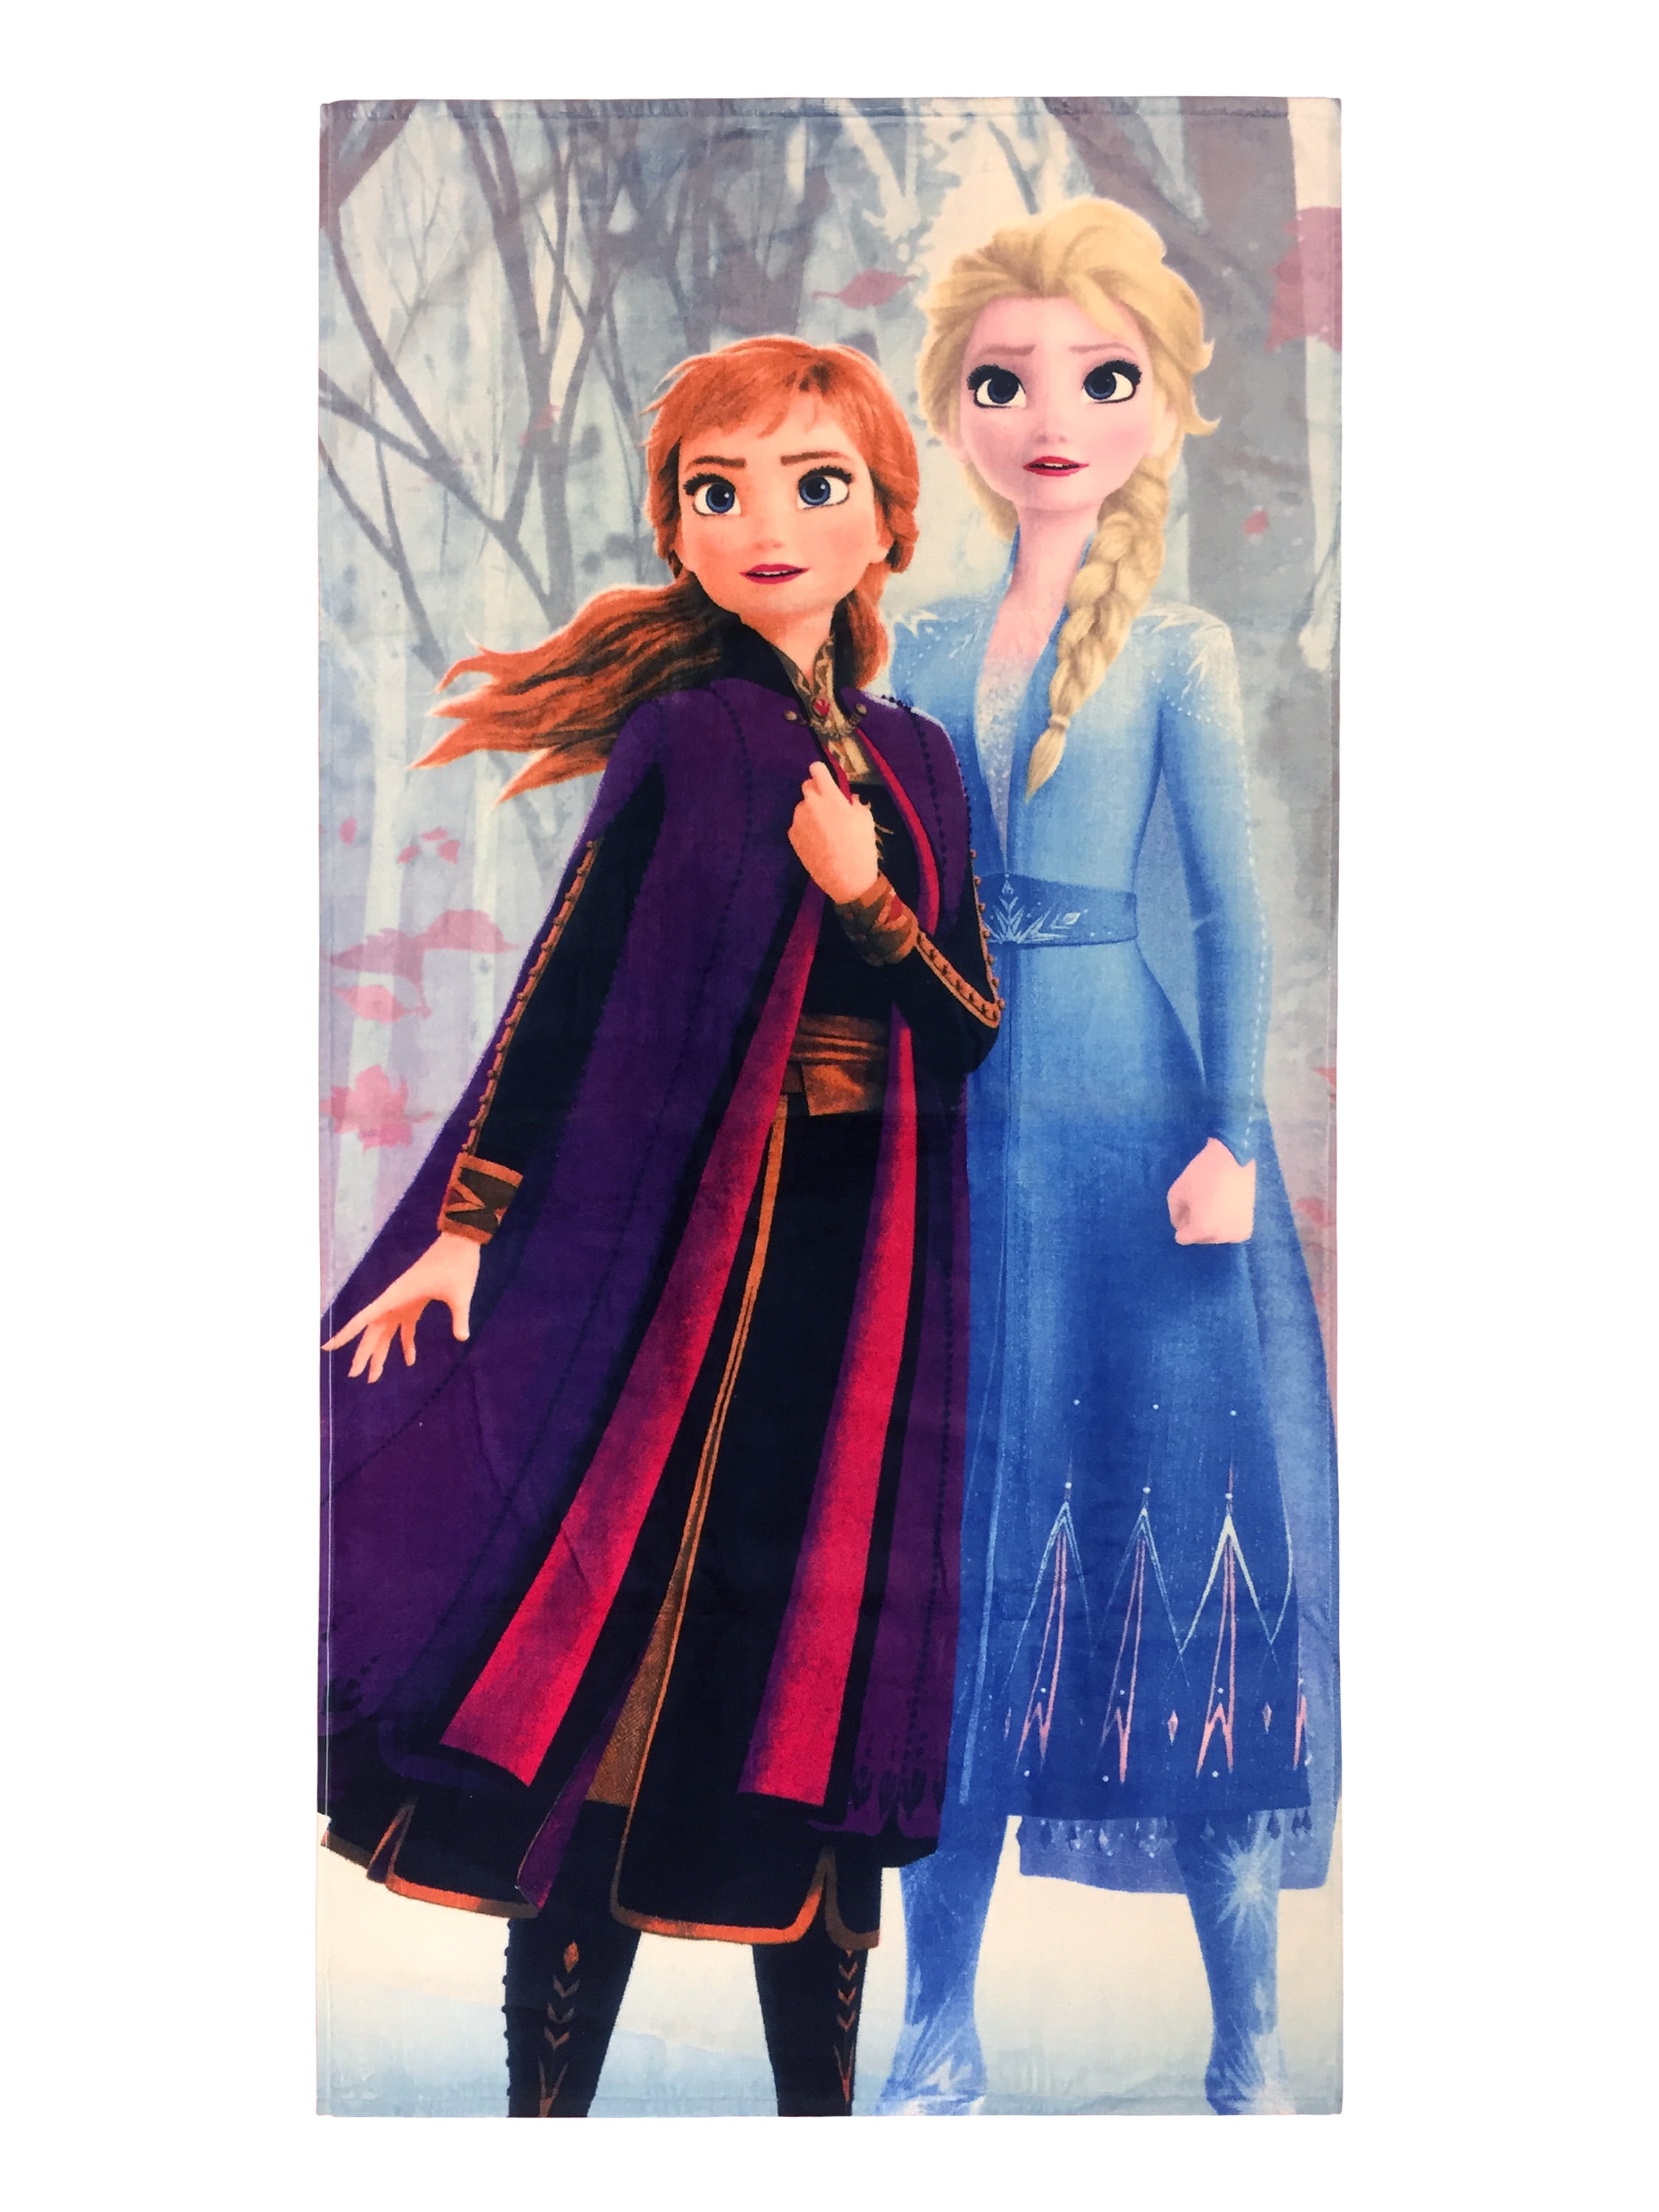 Disney Store Frozen Beach Towel  Anna and Elsa  OR Olaf Chillin' In The Sunshine 